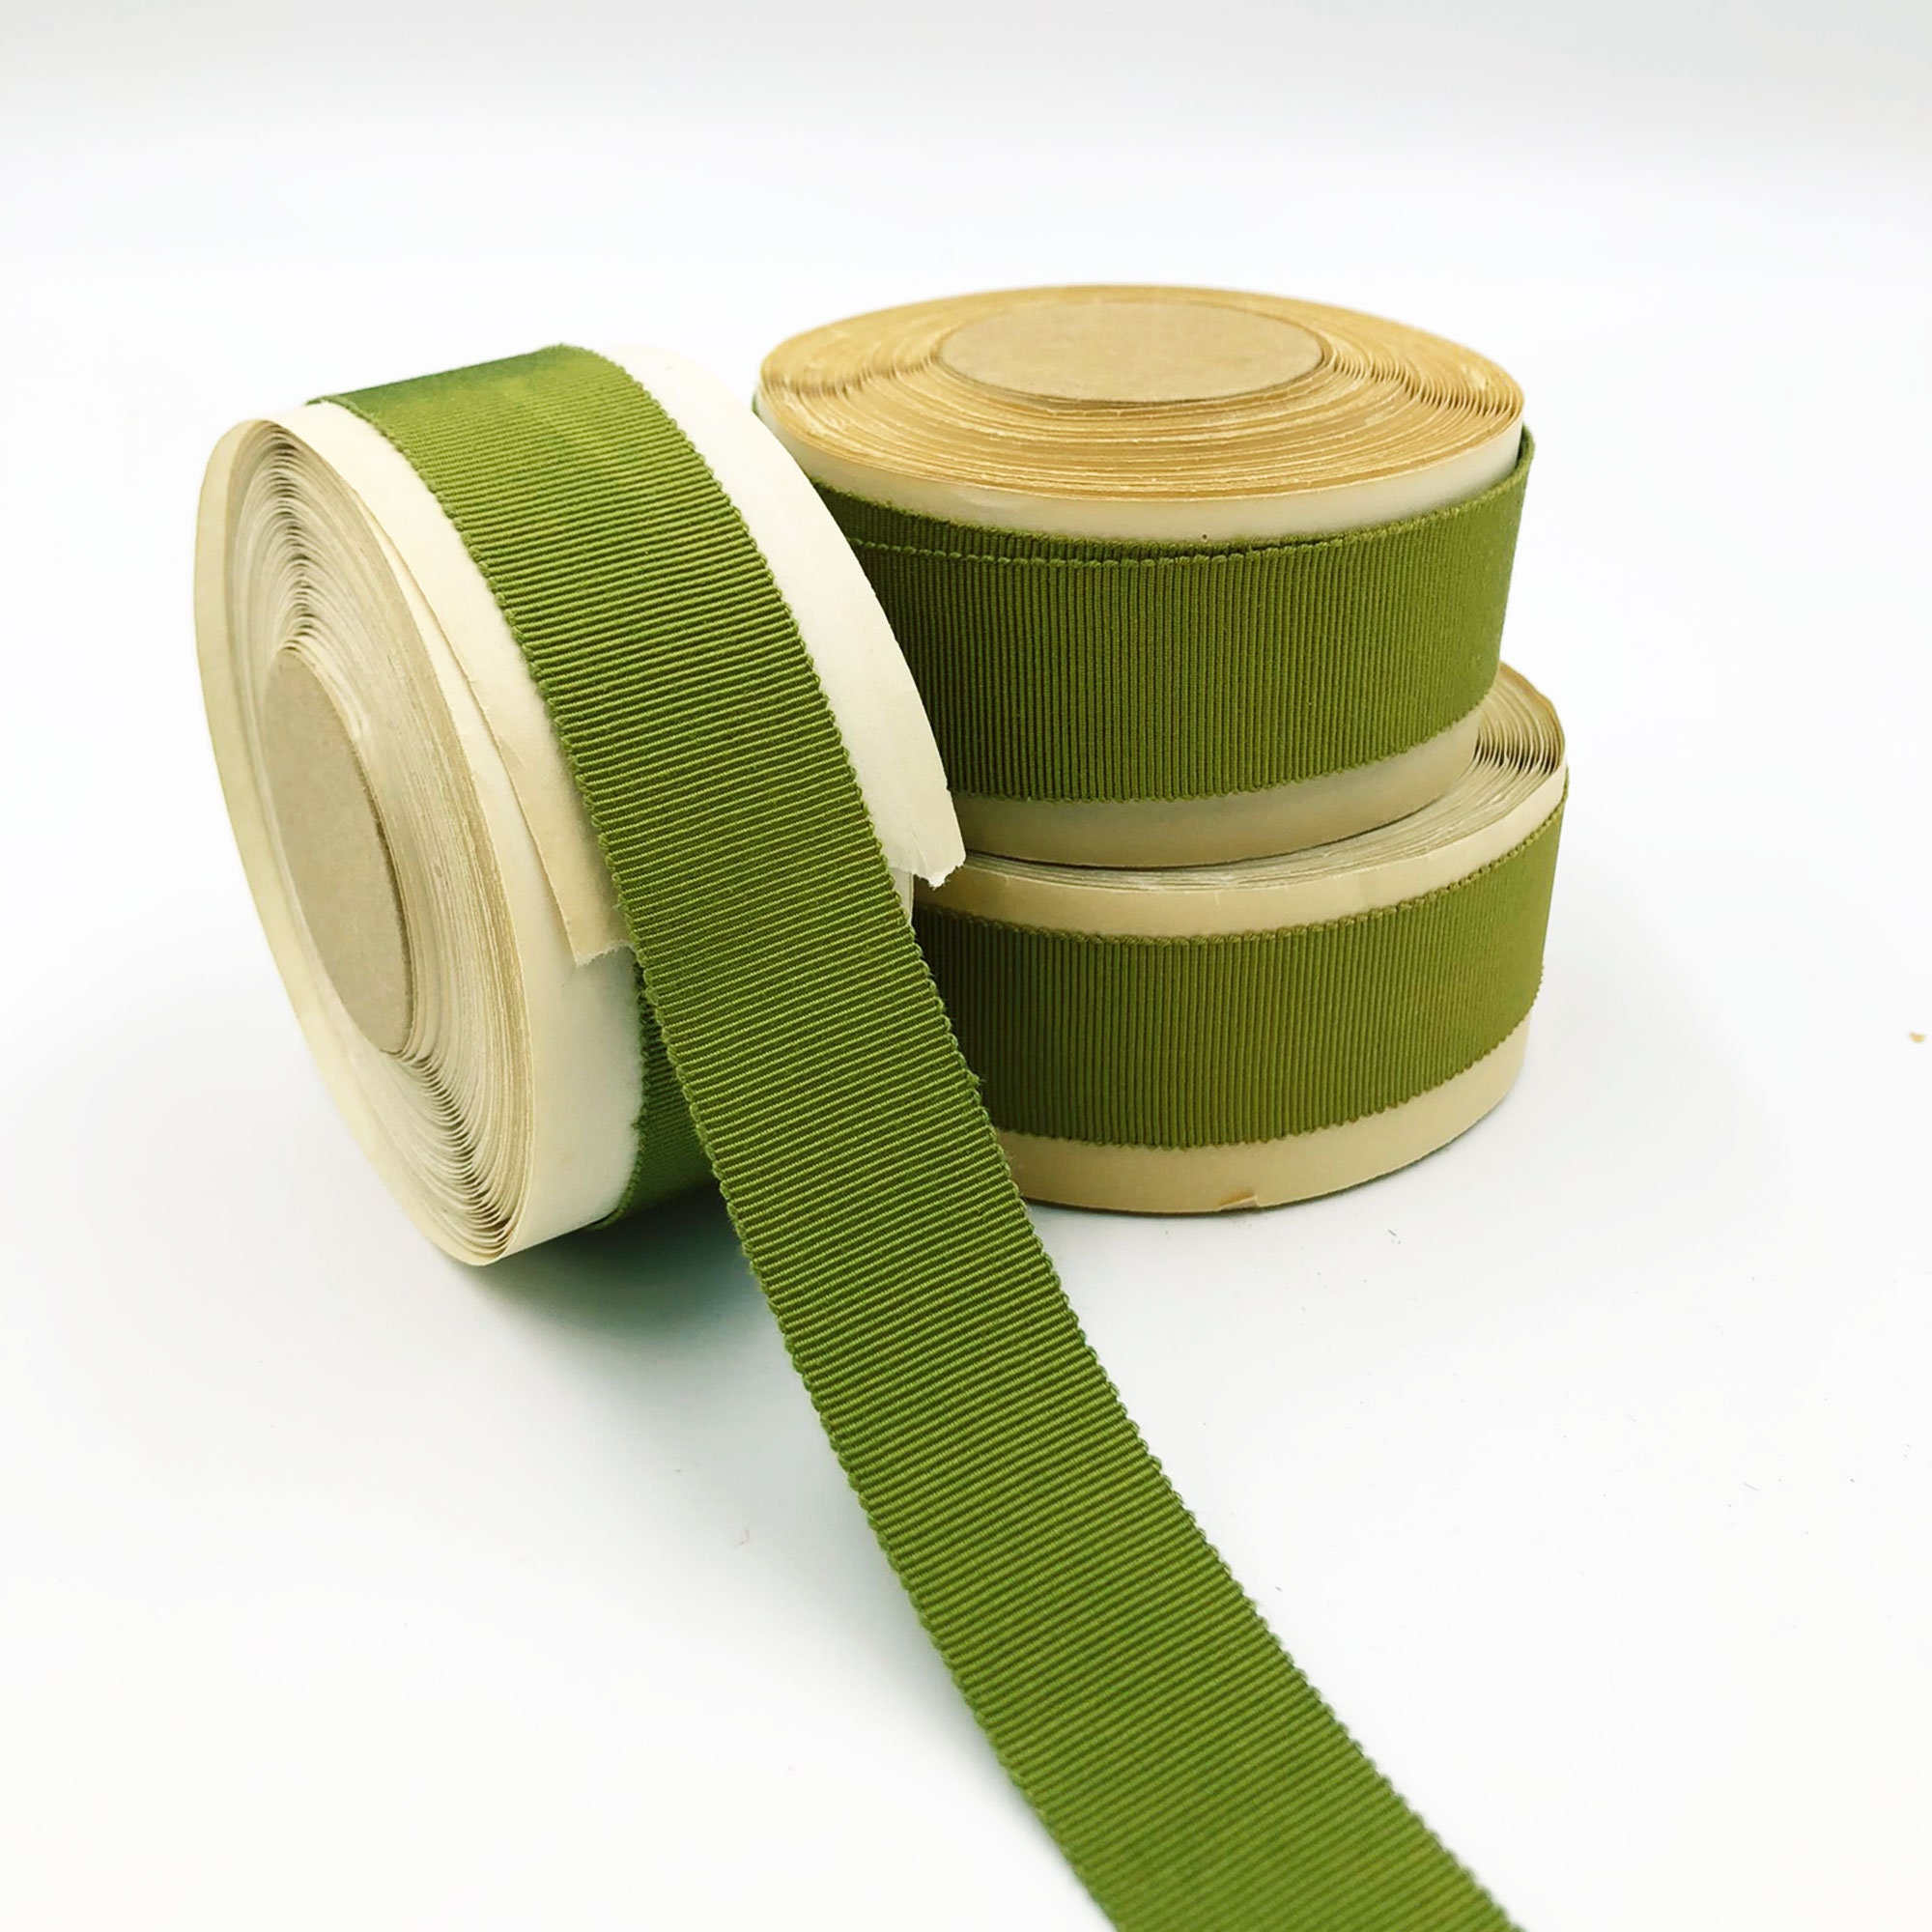 Green grosgrain ribbon, olive green ribbon, thin, dark olive green,  grosgrain trim, 10metres/10.95yds, gift wrapping and craft making trim